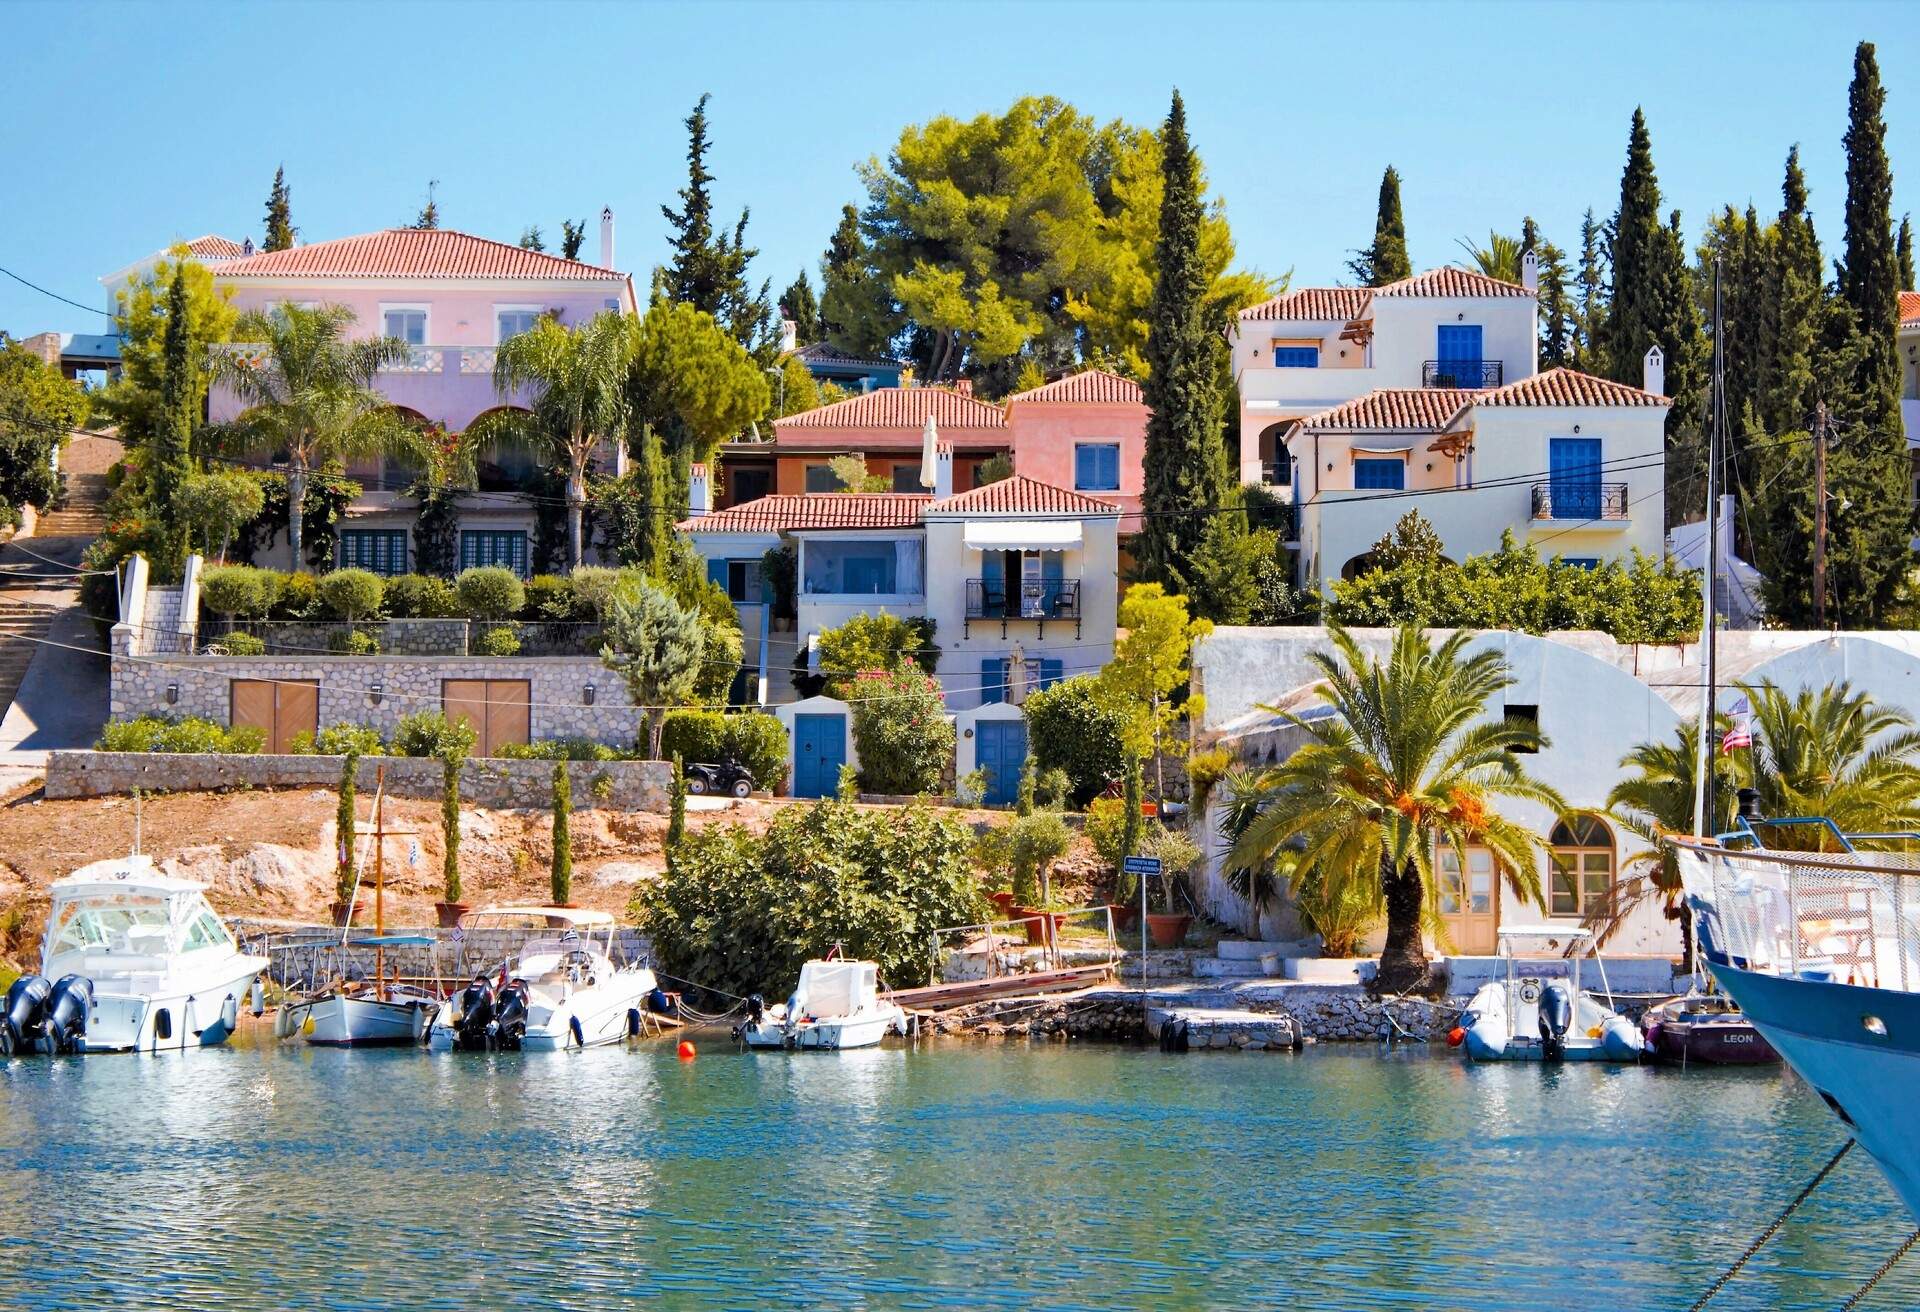 Scenic in the old harbor of Spetses island, Greece, with fishing boats and beautiful mansions, September 24 2015.